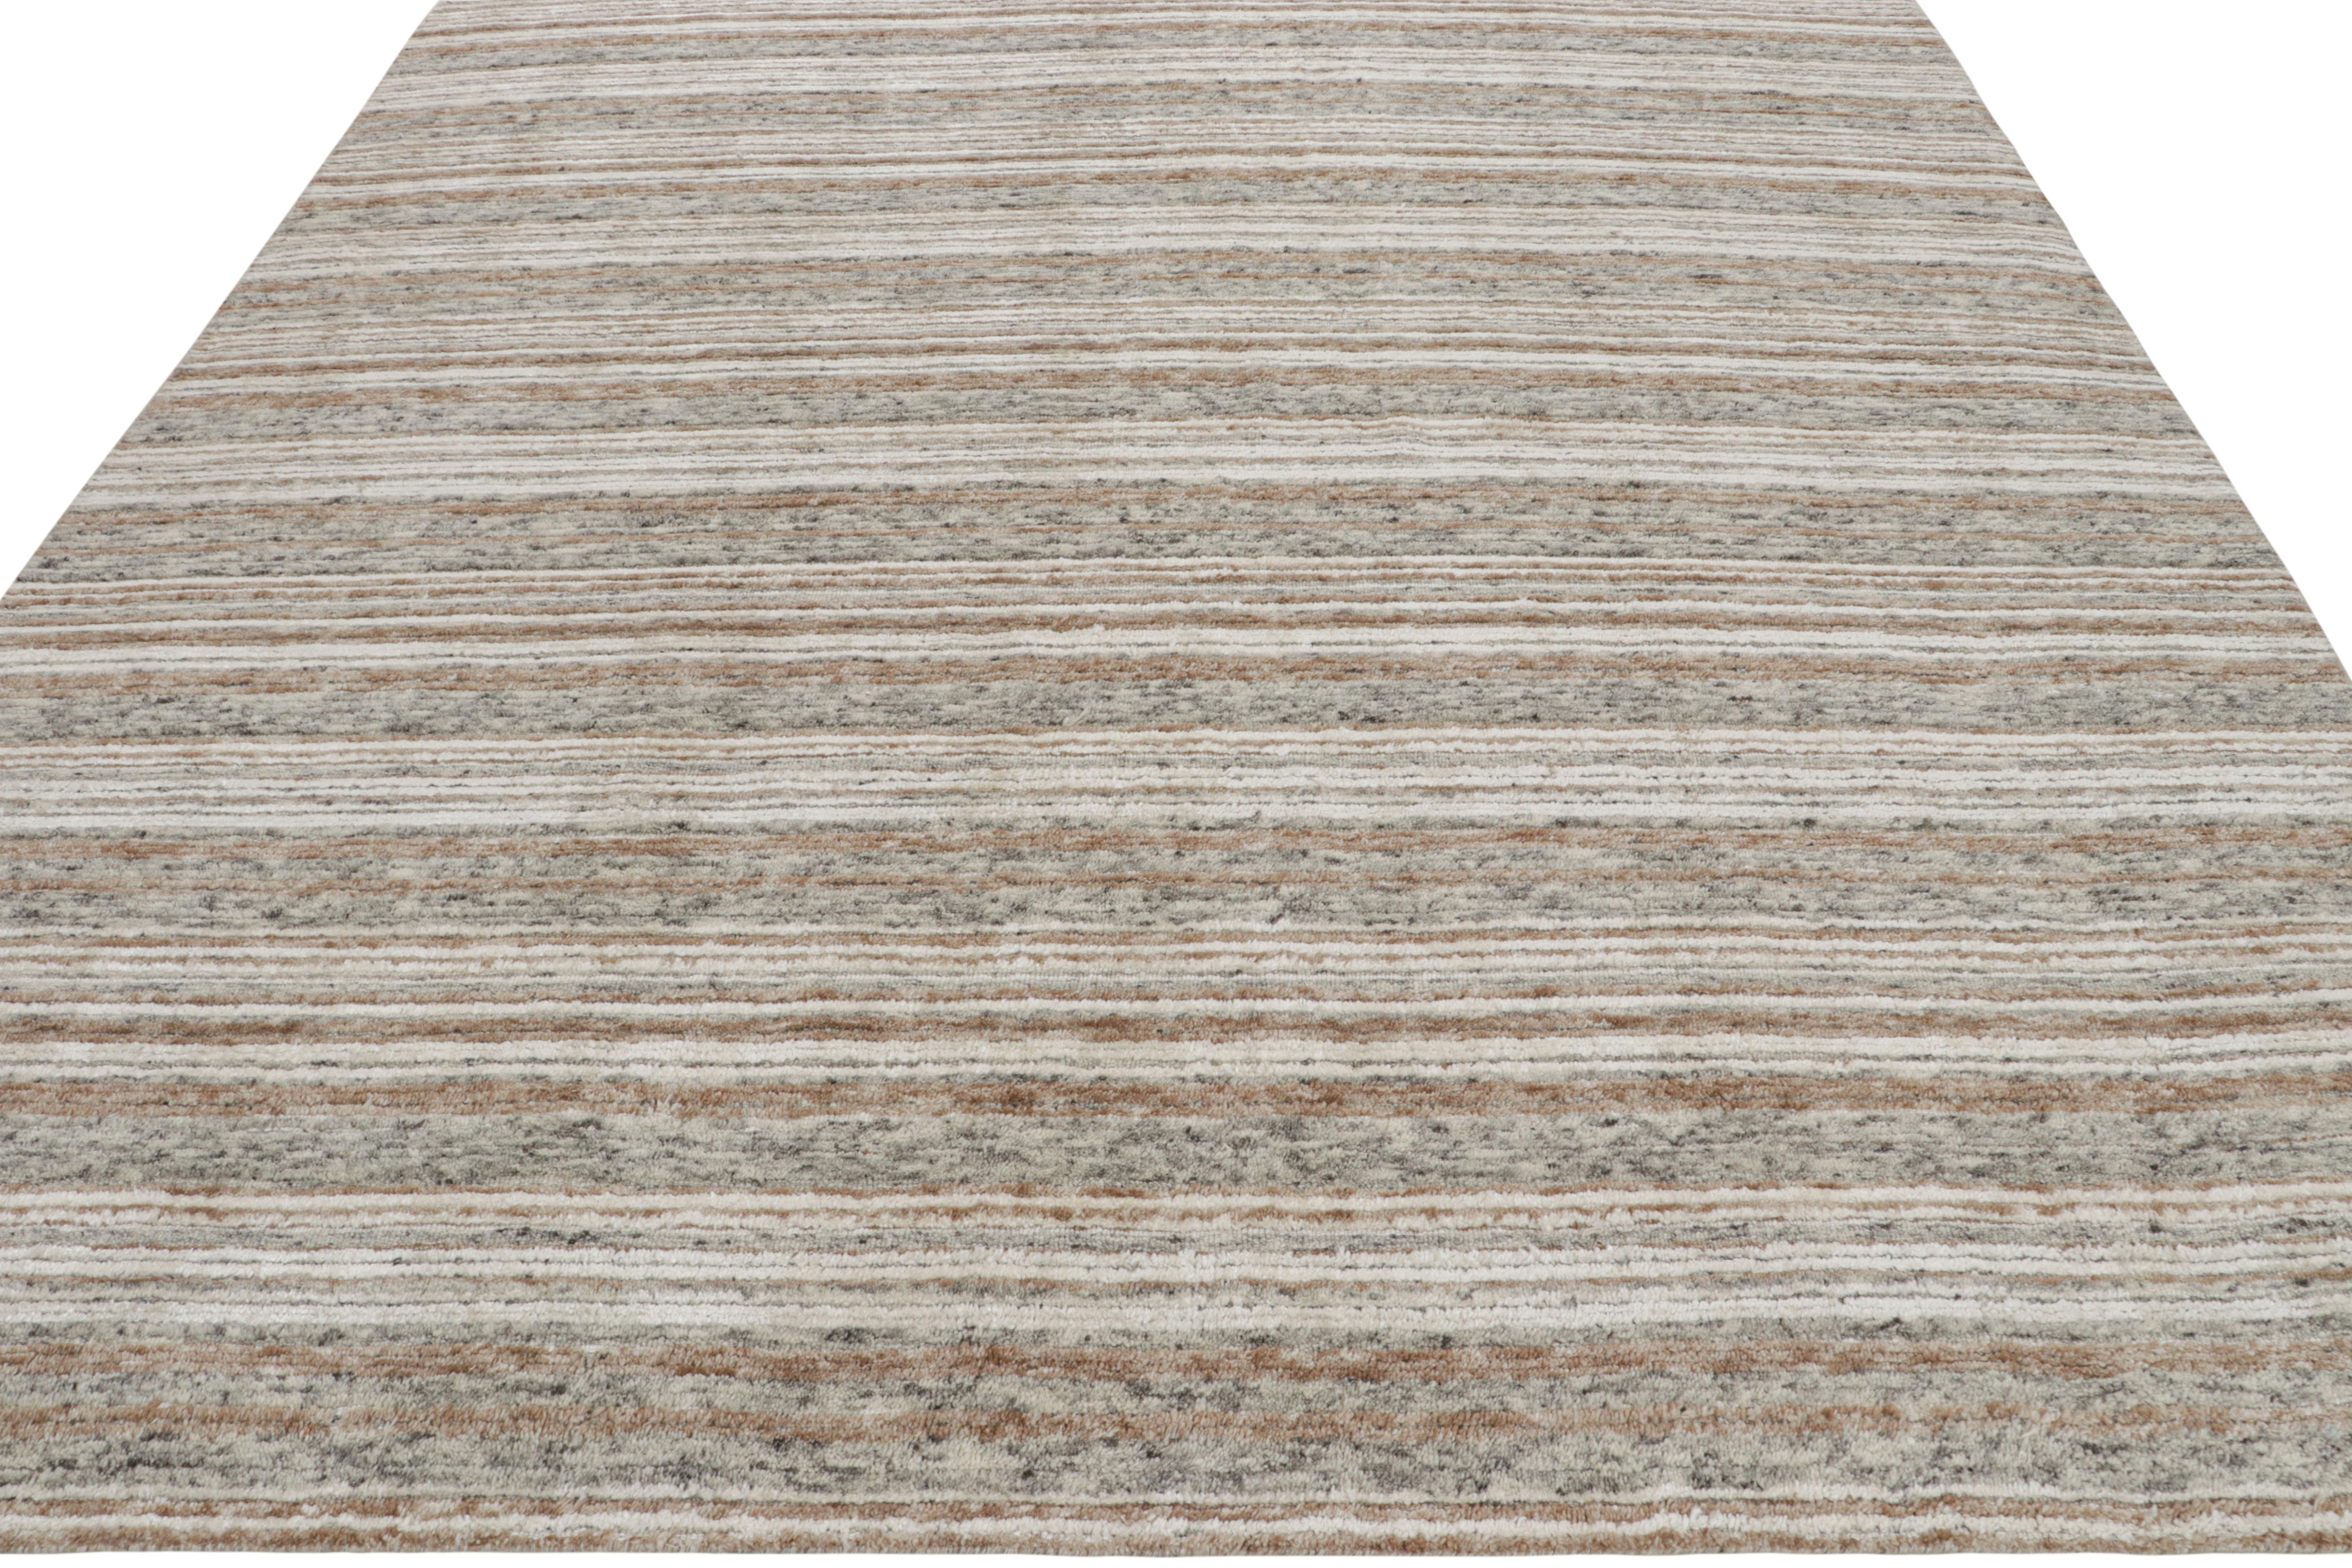 Modern Rug & Kilim’s Textural Rug with Beige-Brown and Gray Stripes “Light on Loom” For Sale